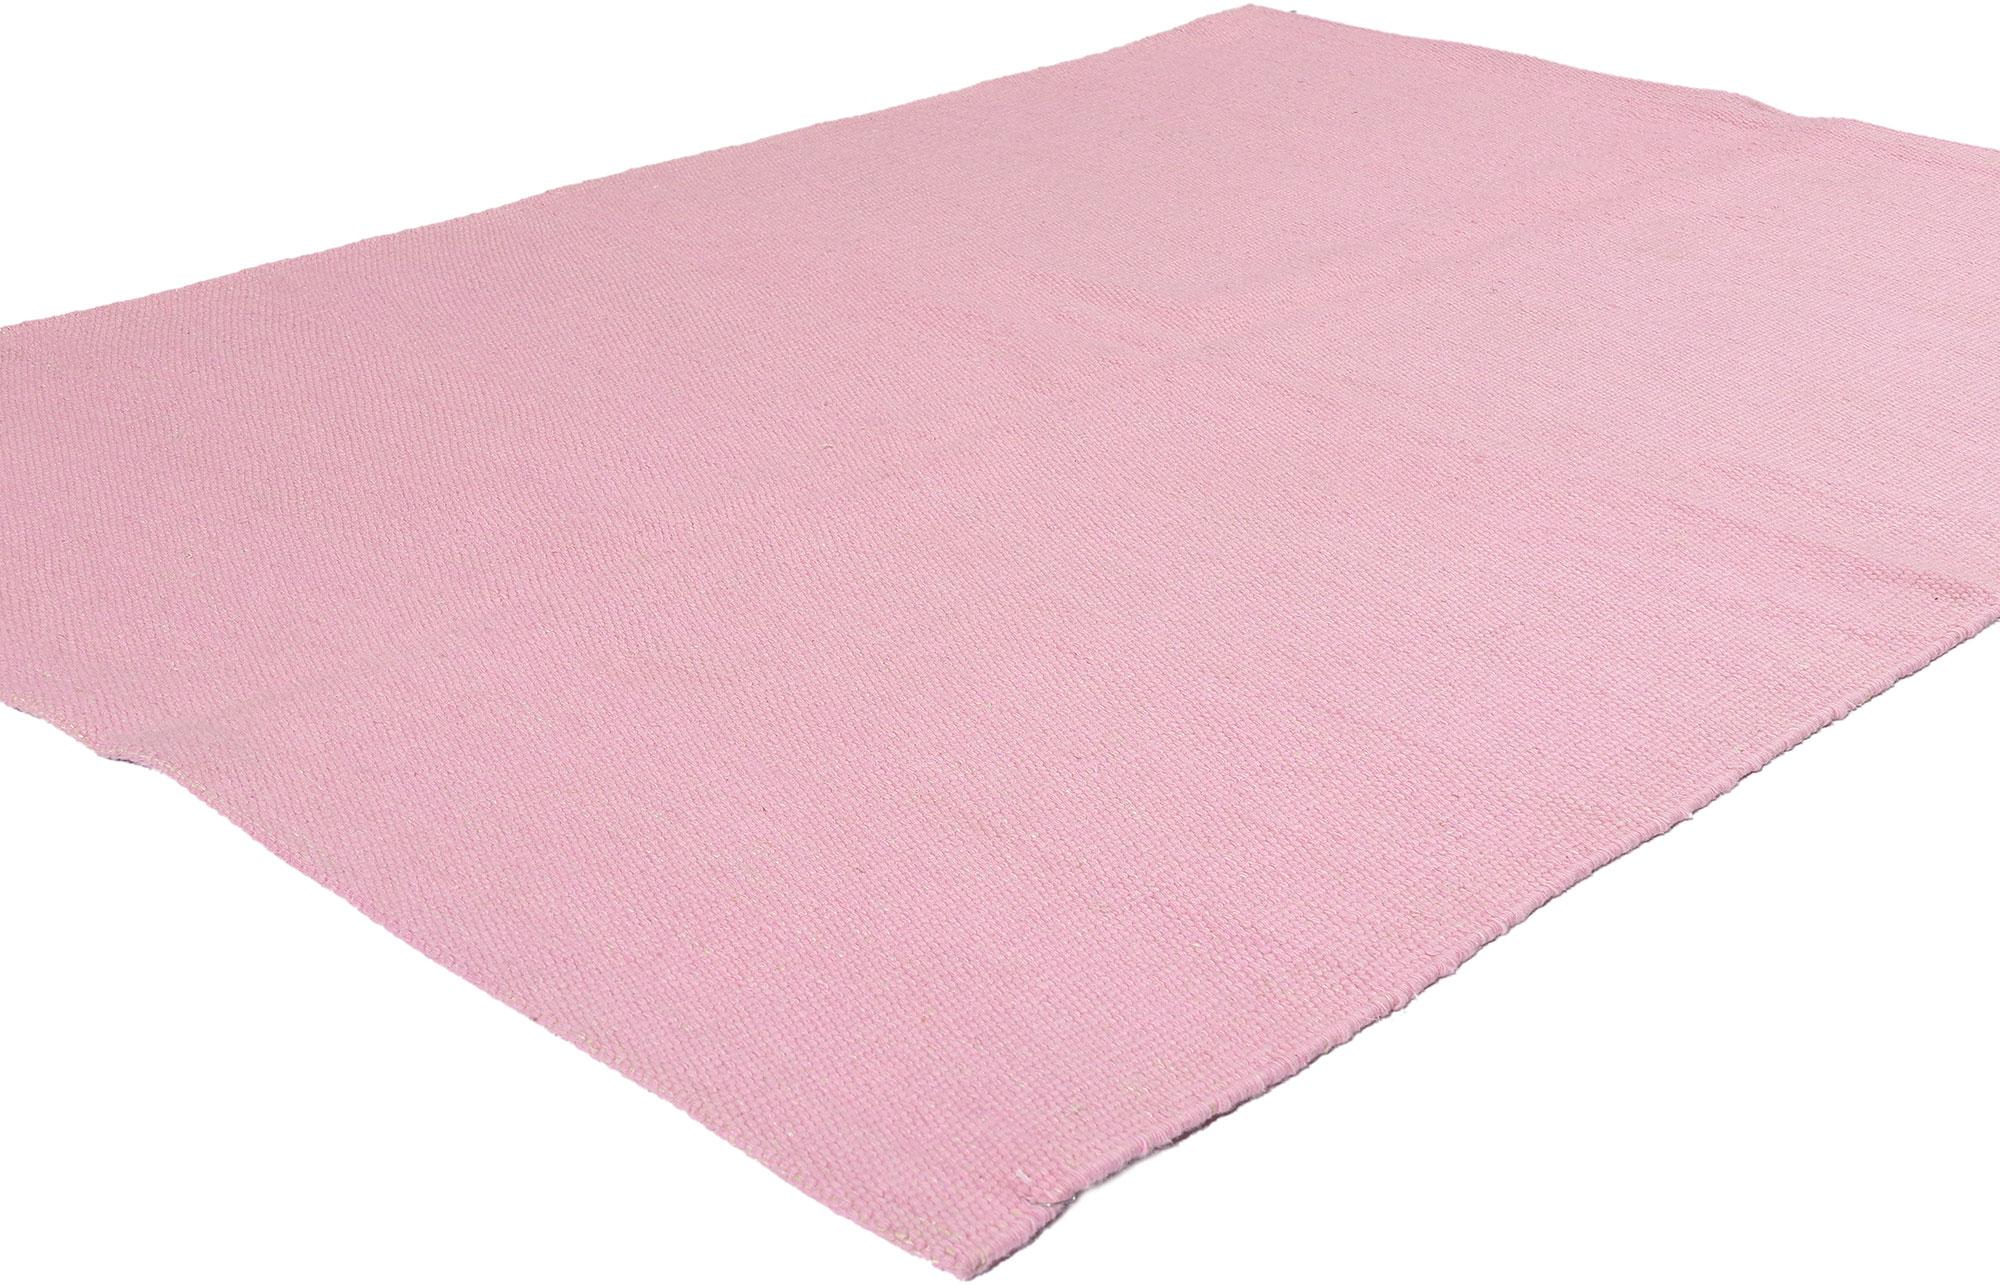 30688 Scandinavian Modern Swedish Inspired Pink Kilim Rug, 05'00 x 06'10. Swedish-style kilim rugs, meticulously crafted in India, seamlessly marry the classic aesthetics of Swedish design with the esteemed craftsmanship of Indian rug making.